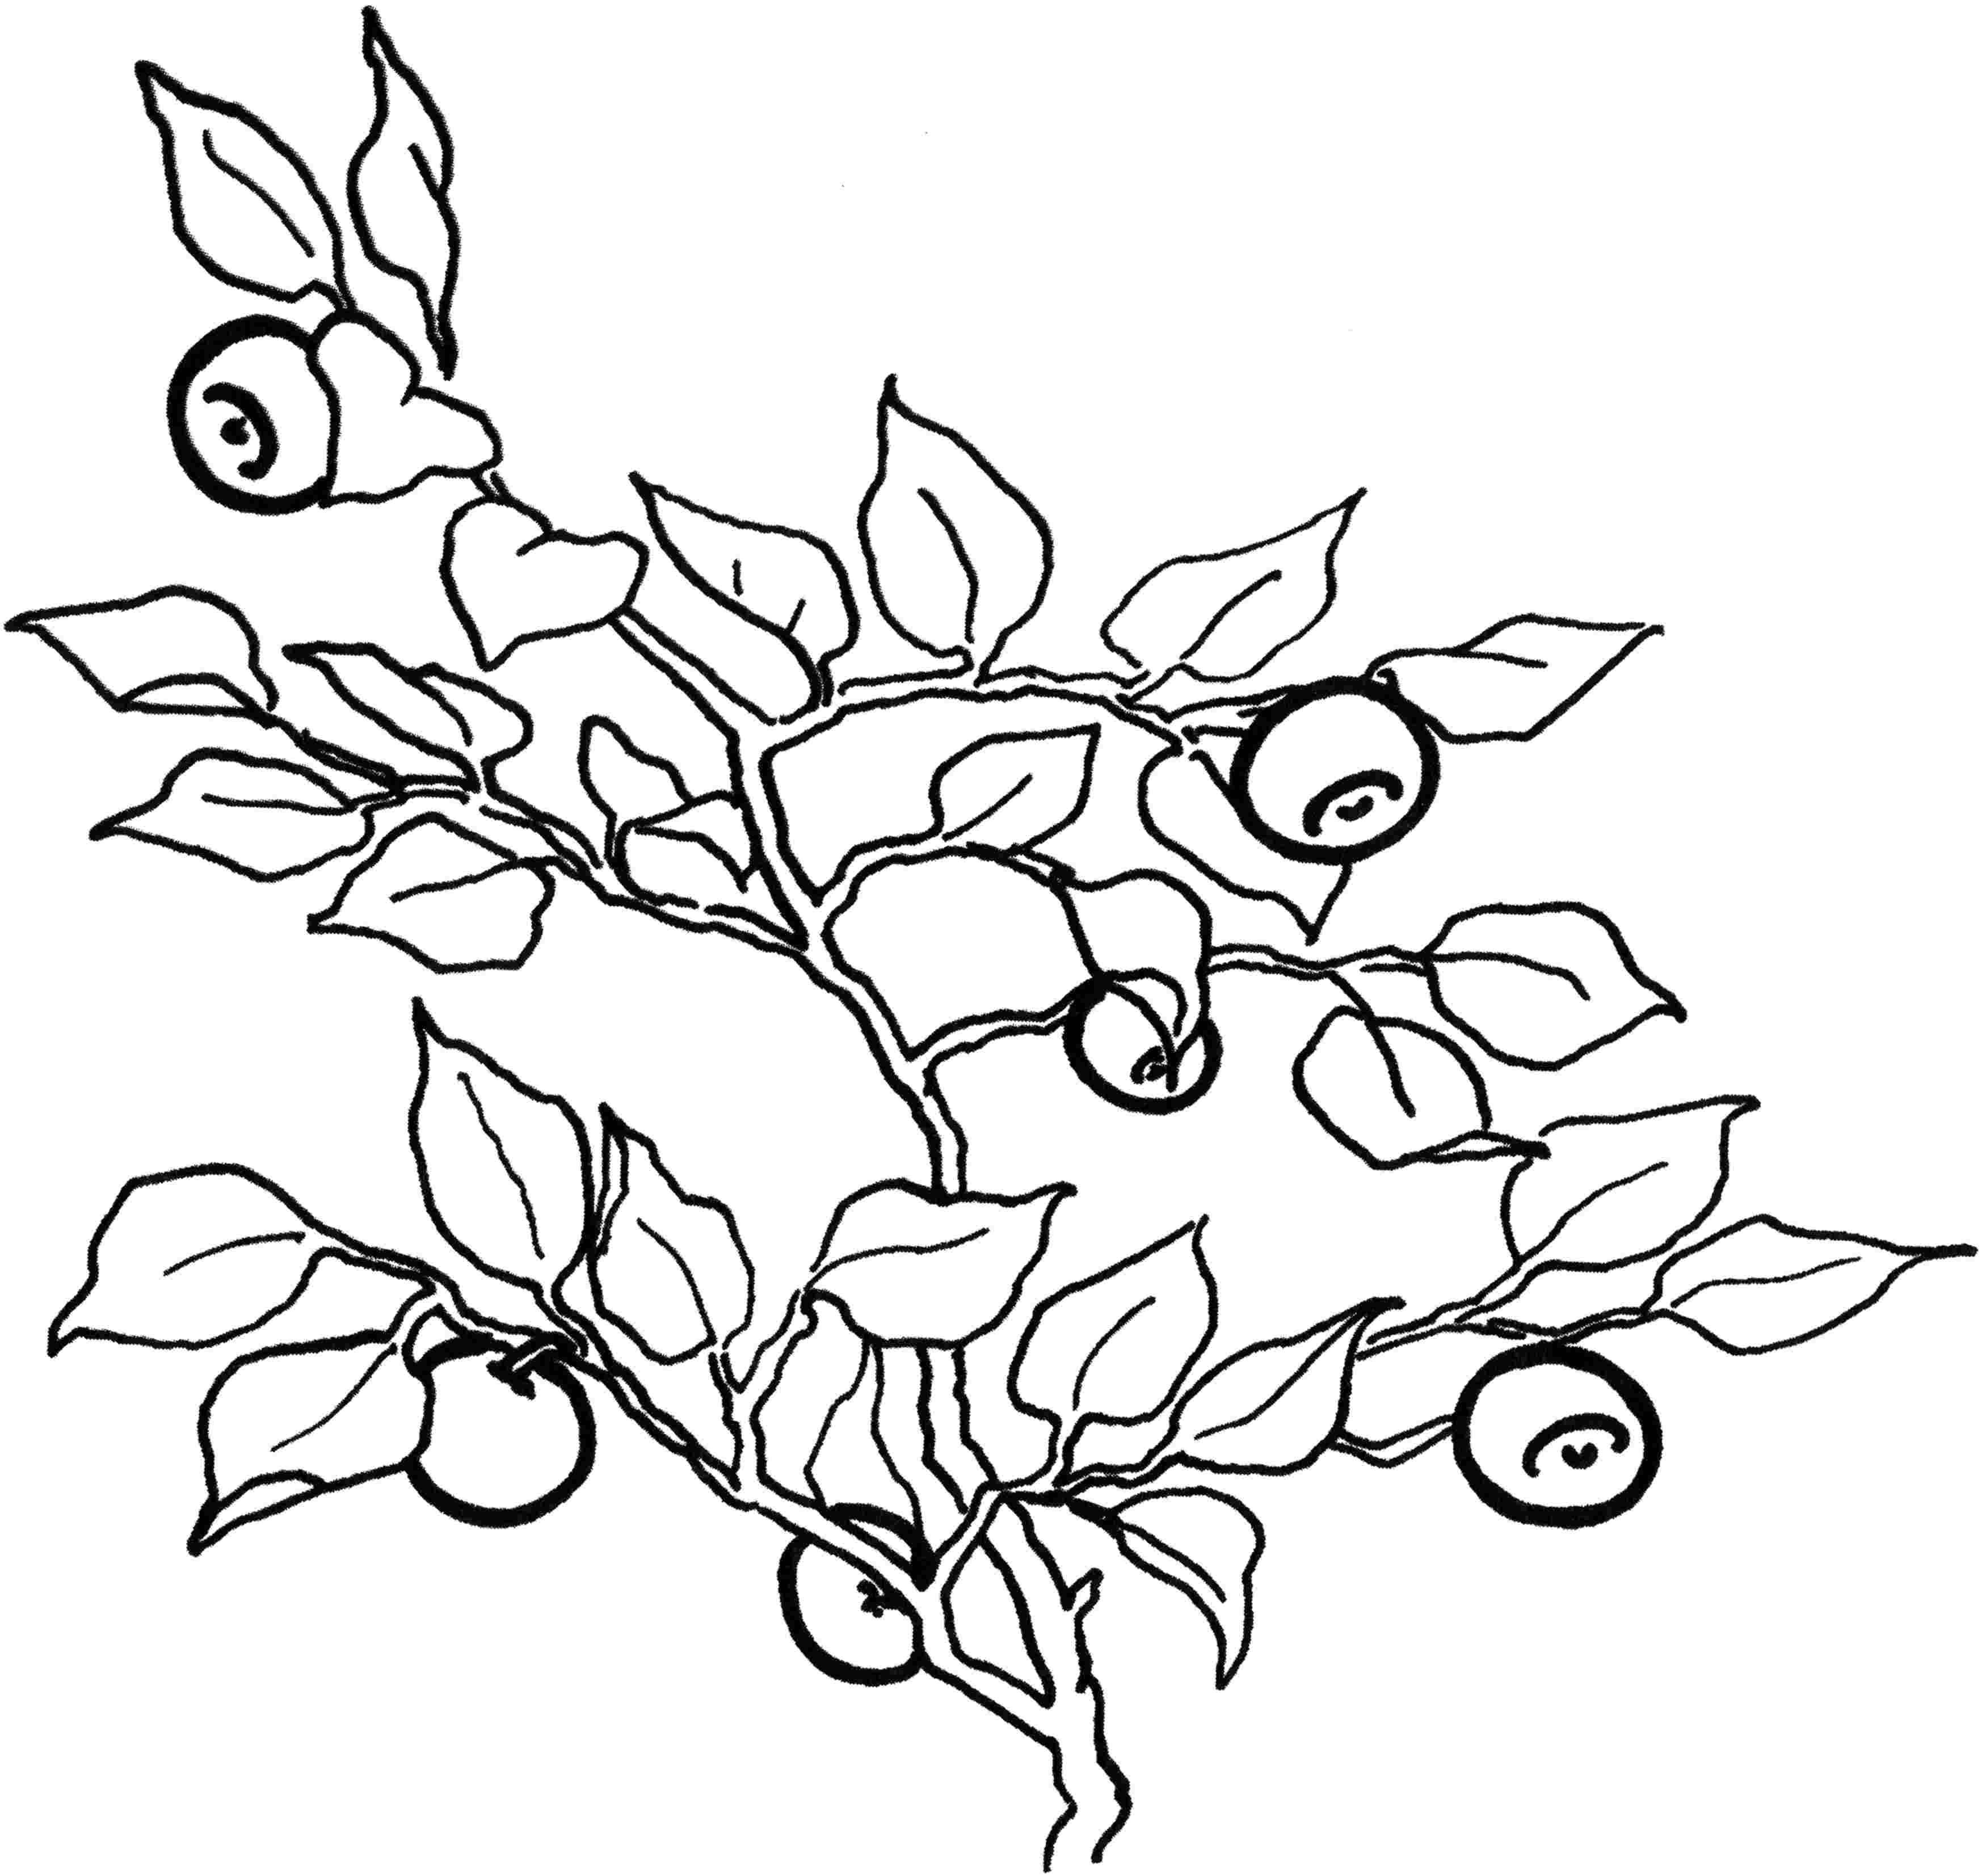 Coloring Blueberries. Category berries. Tags:  blueberry.